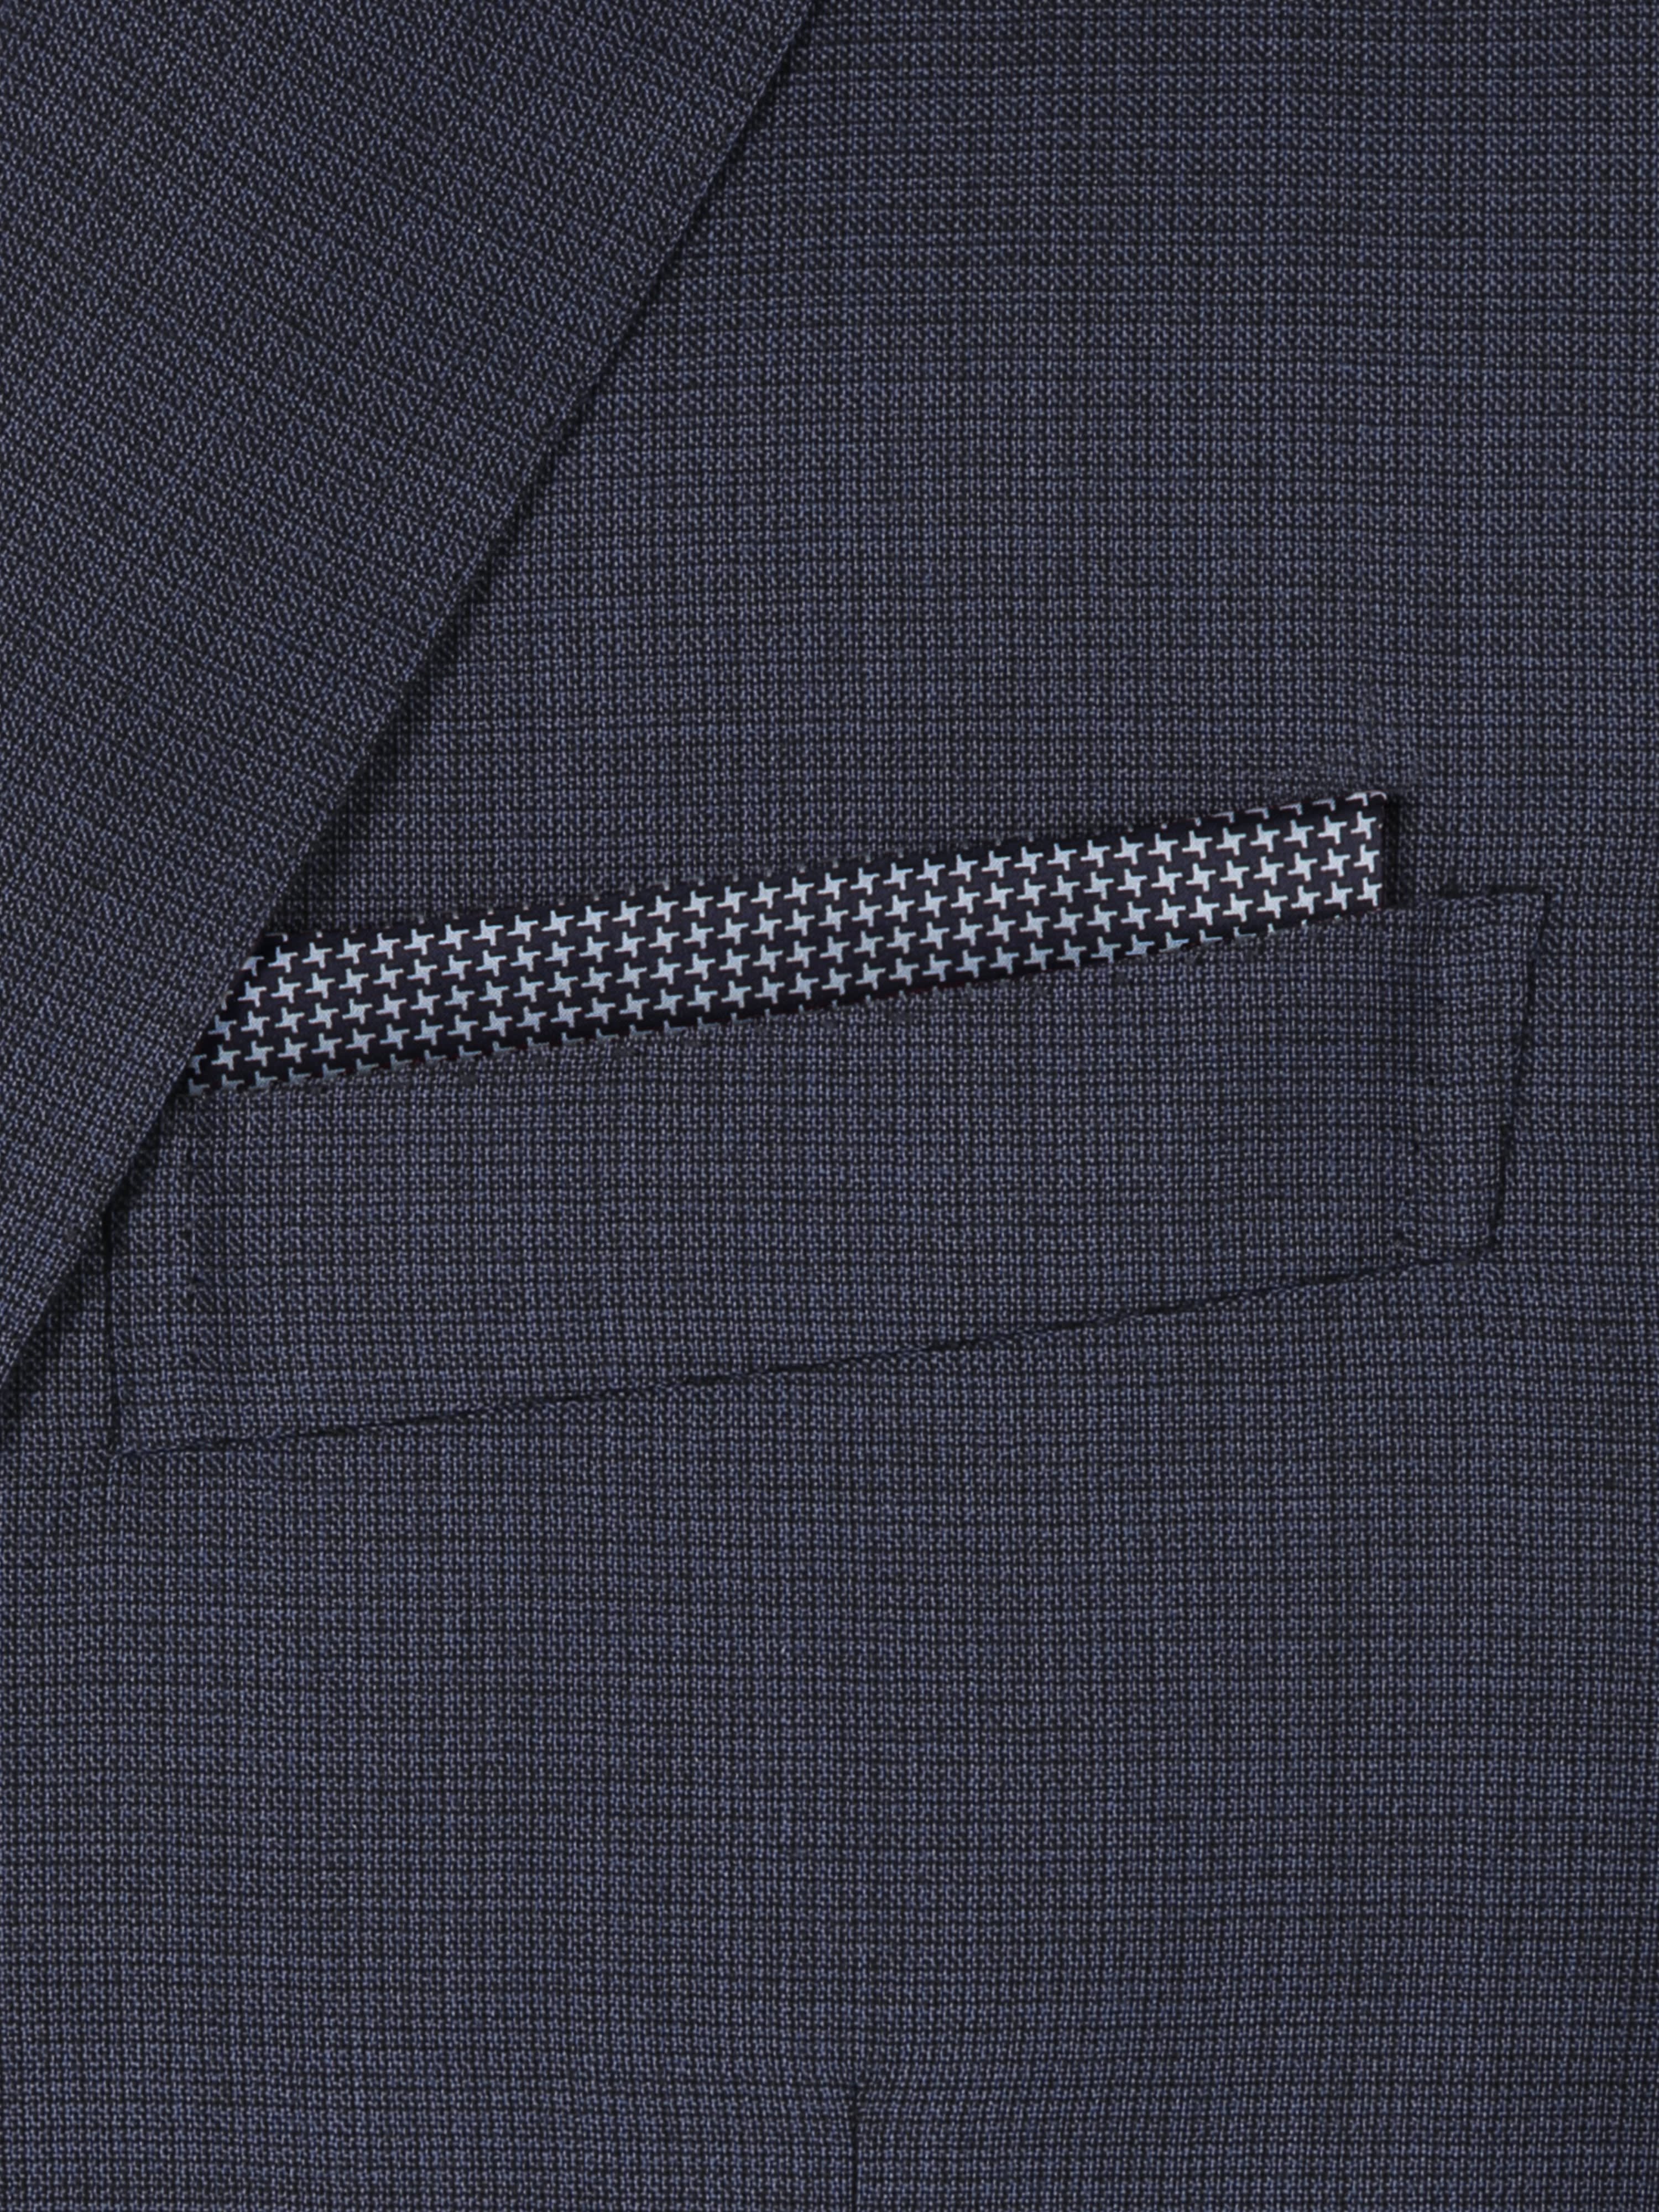 Navy blue silk pocket square | Brioni® US Official Store